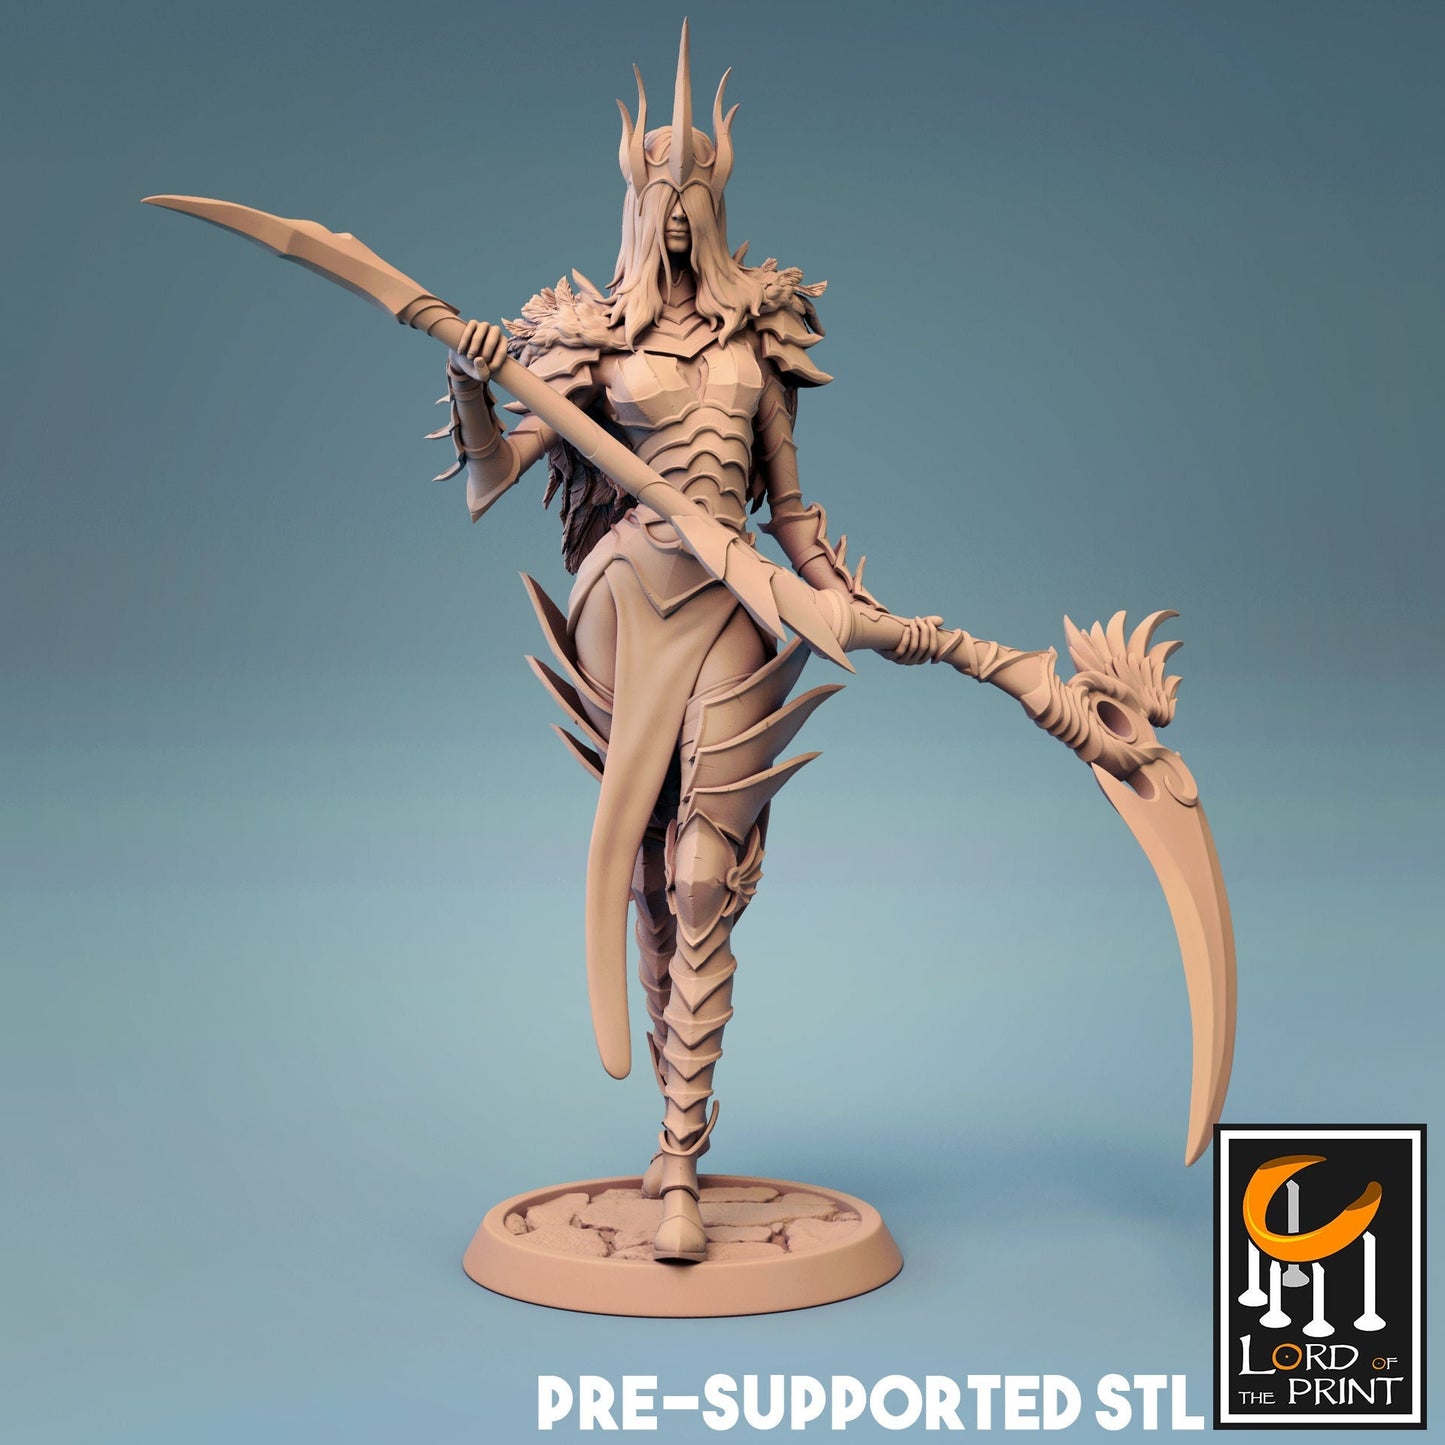 Female Human Fighter with Scythe D&D miniature, by Lord of the Print // 3D Print on Demand / DnD / Pathfinder / RPG